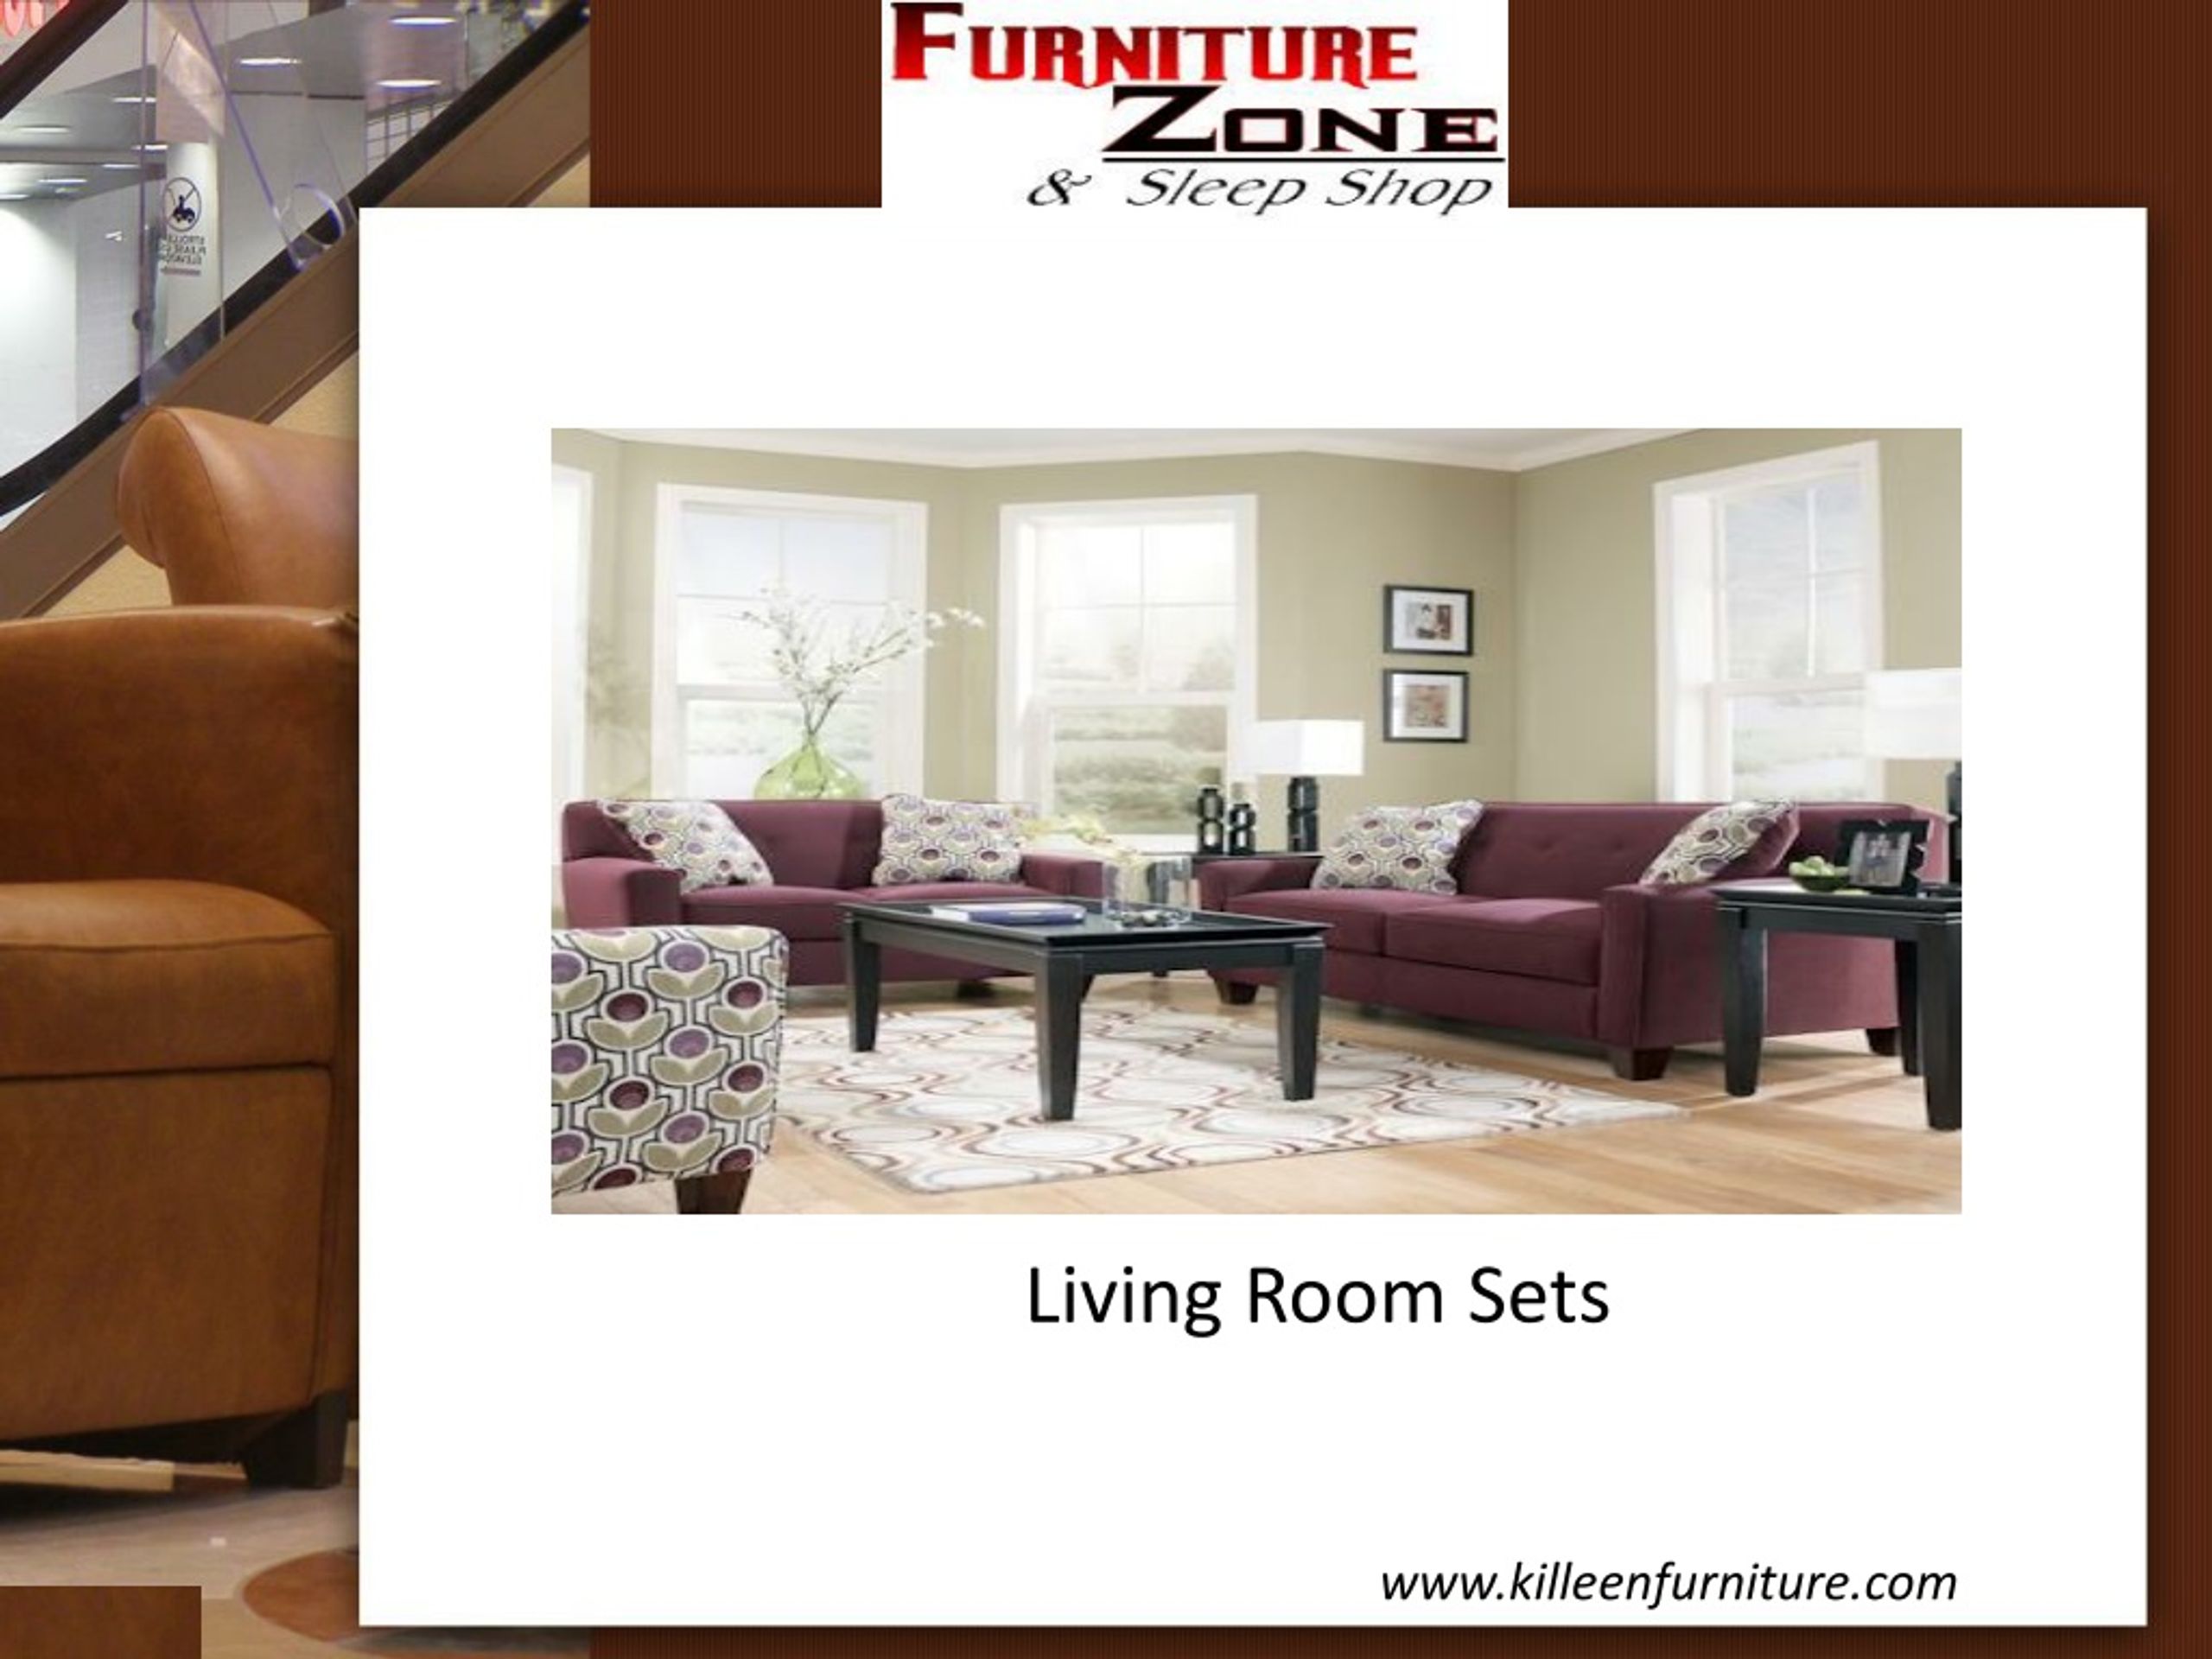 PPT  Waco Furniture Stores  Furniture Zone PowerPoint 